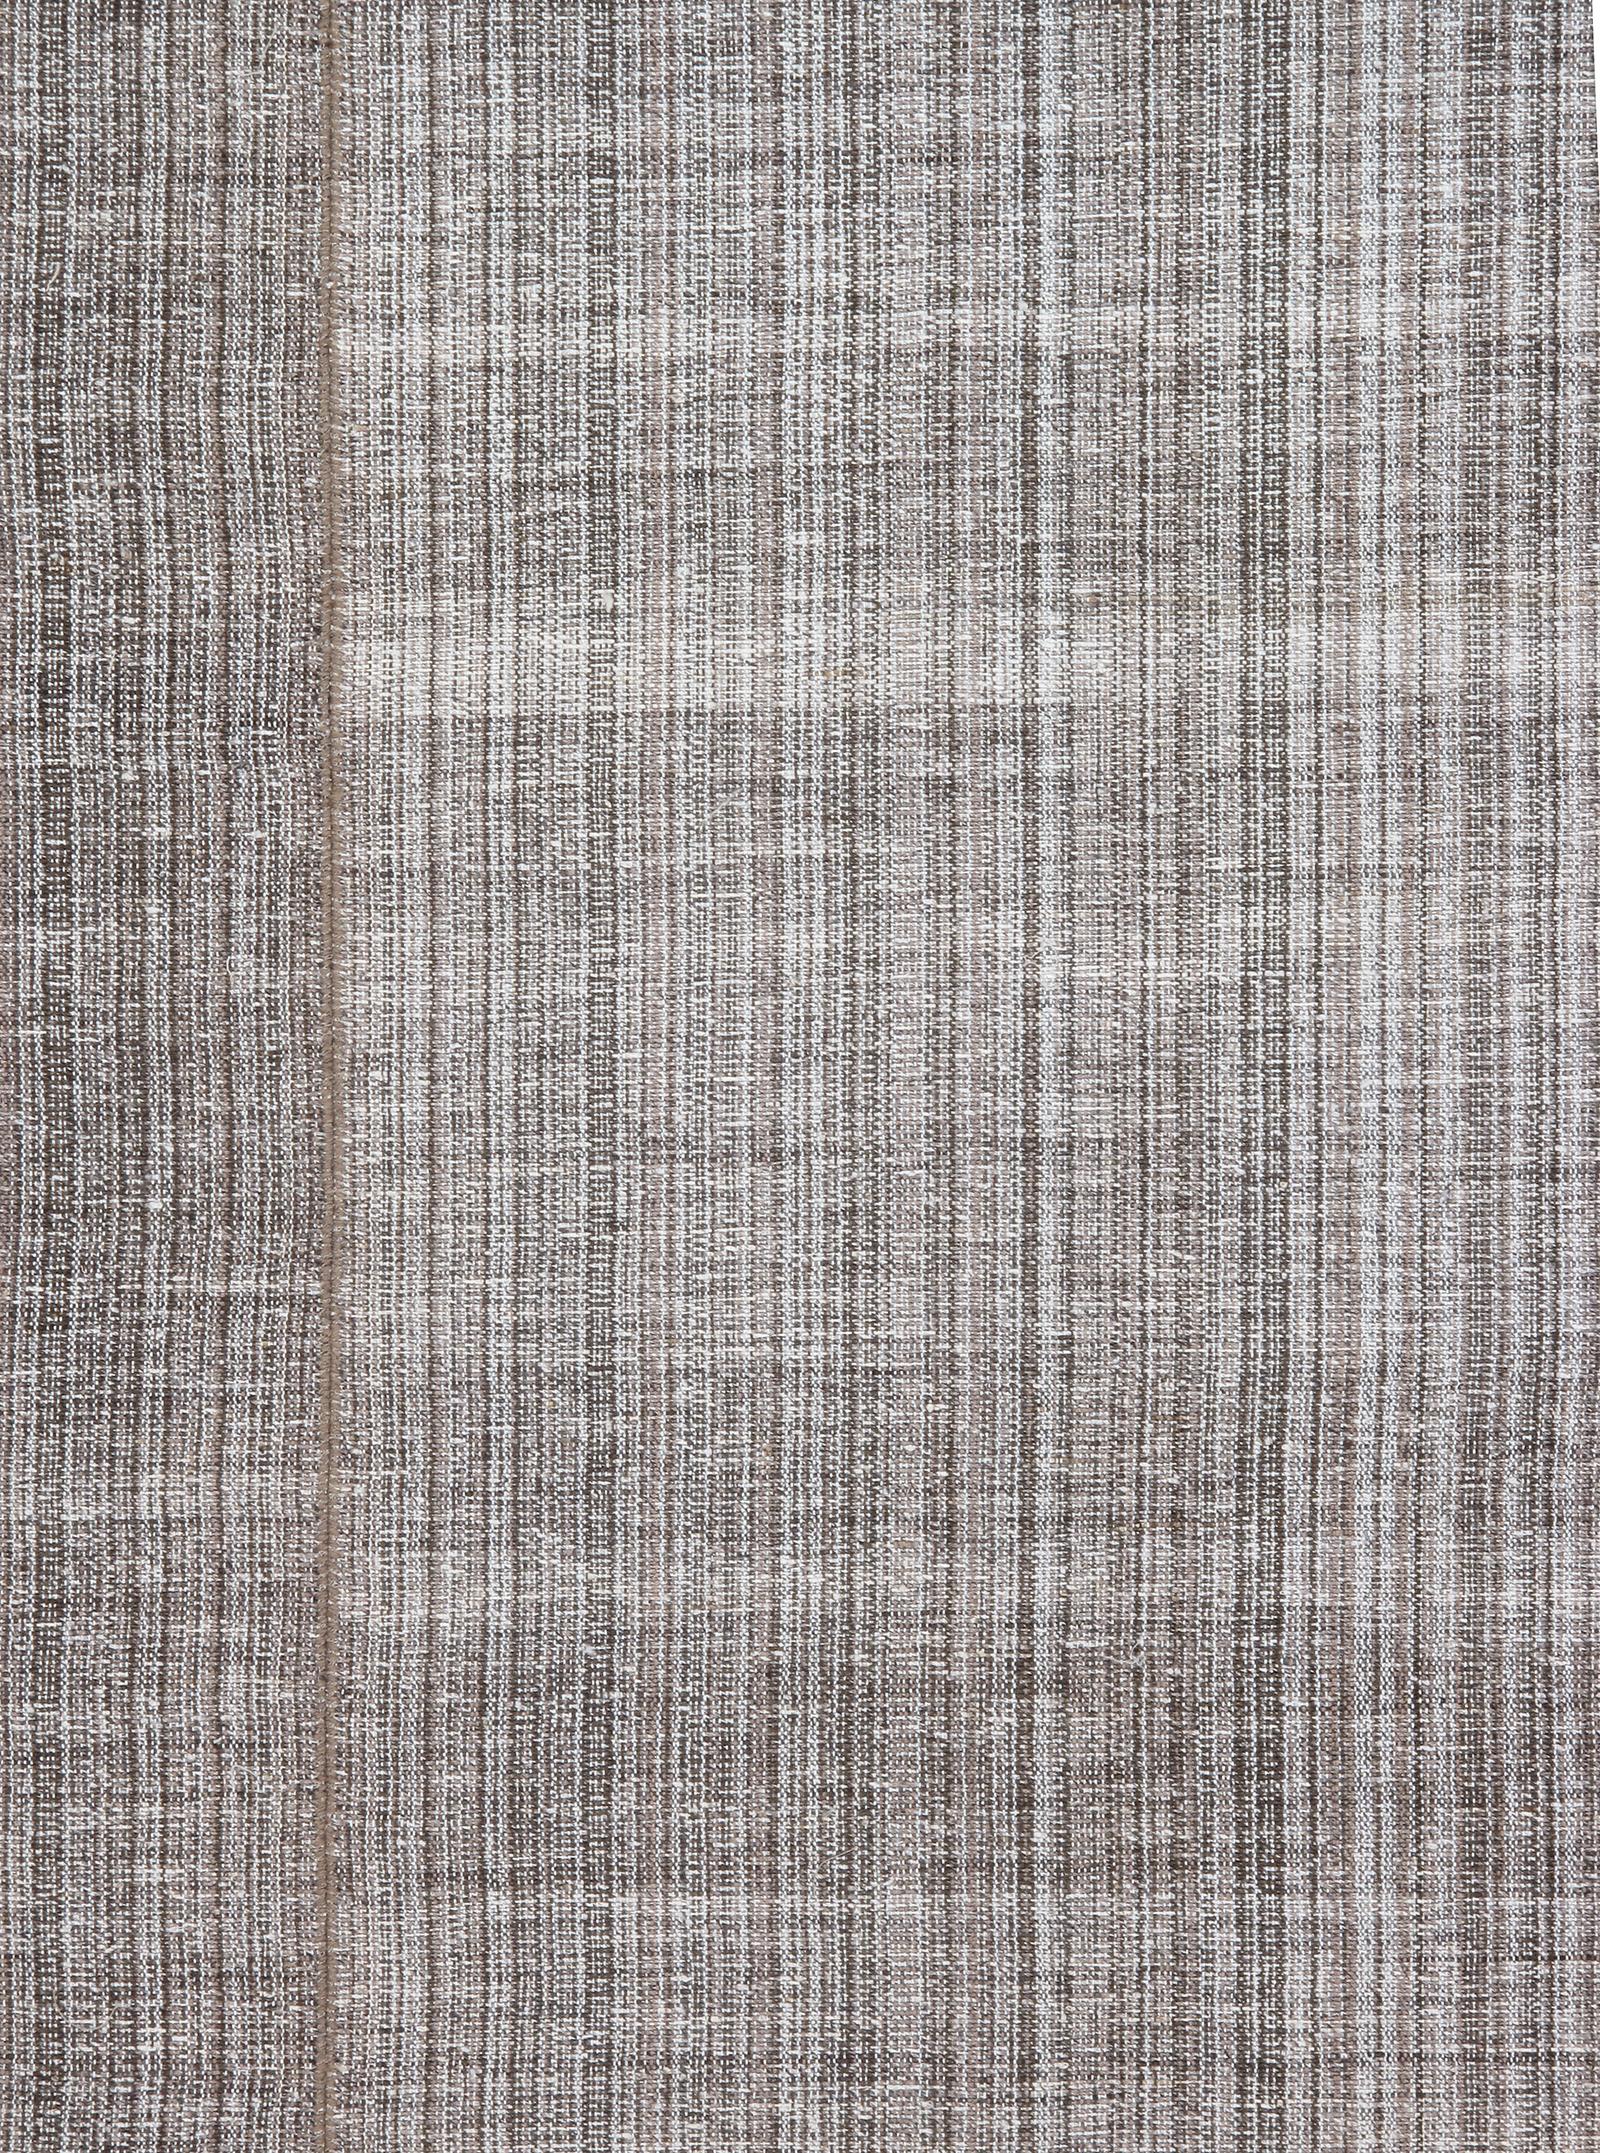 The Mid-Century Modern collection is skillfully sourced by N A S I R I and exclusive to our showroom. These flat-weaves embody the minimalist sophistication that emerged in the mid-20th century which continues to thrive today. We bridge the elements